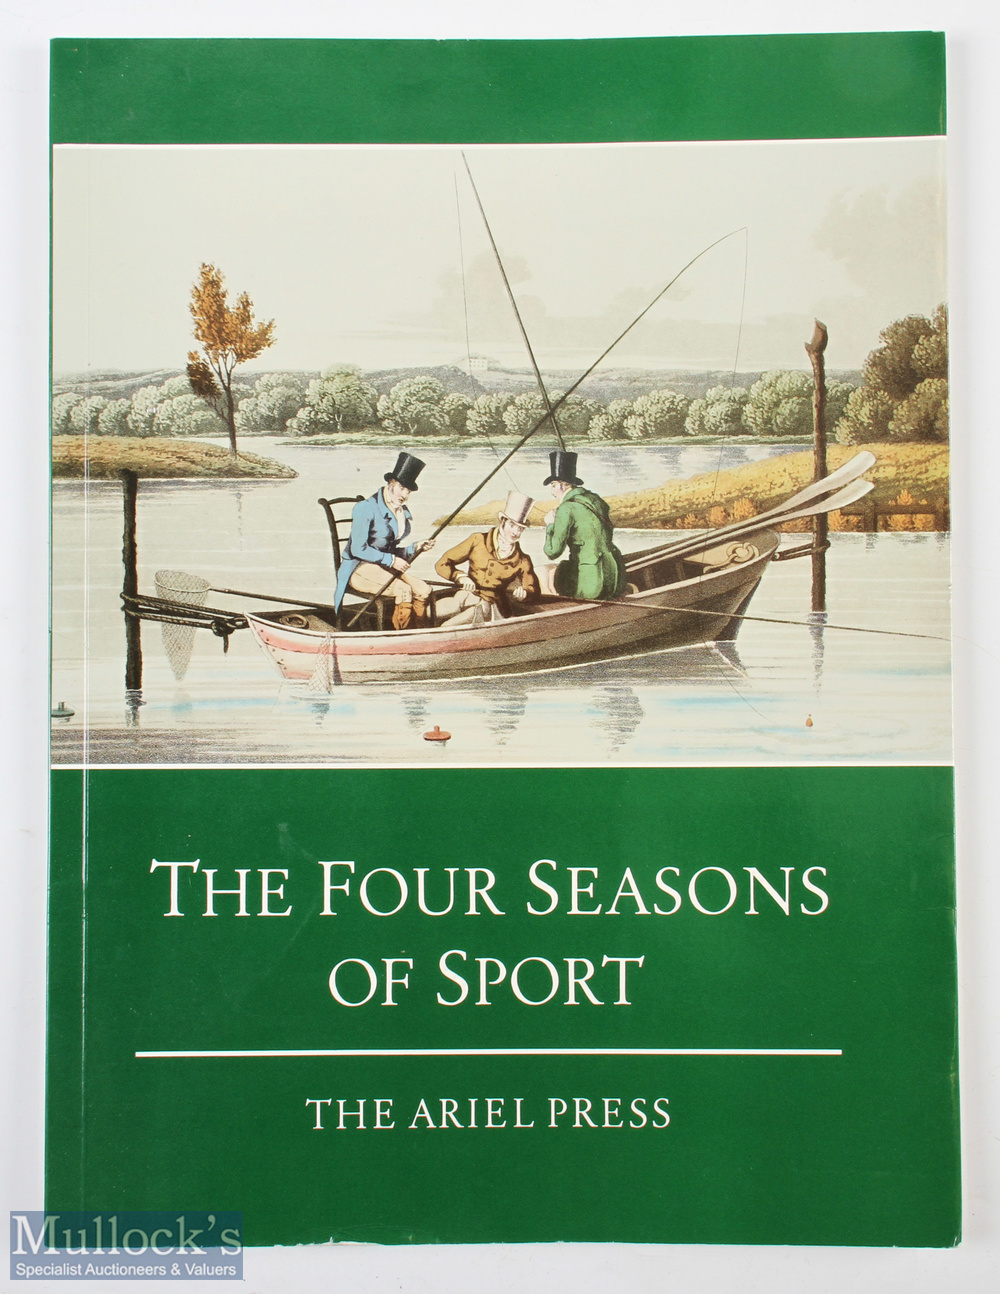 The Four Seasons of Sport - The Ariel press London book of prints fishing, hunting horse racing 31cm